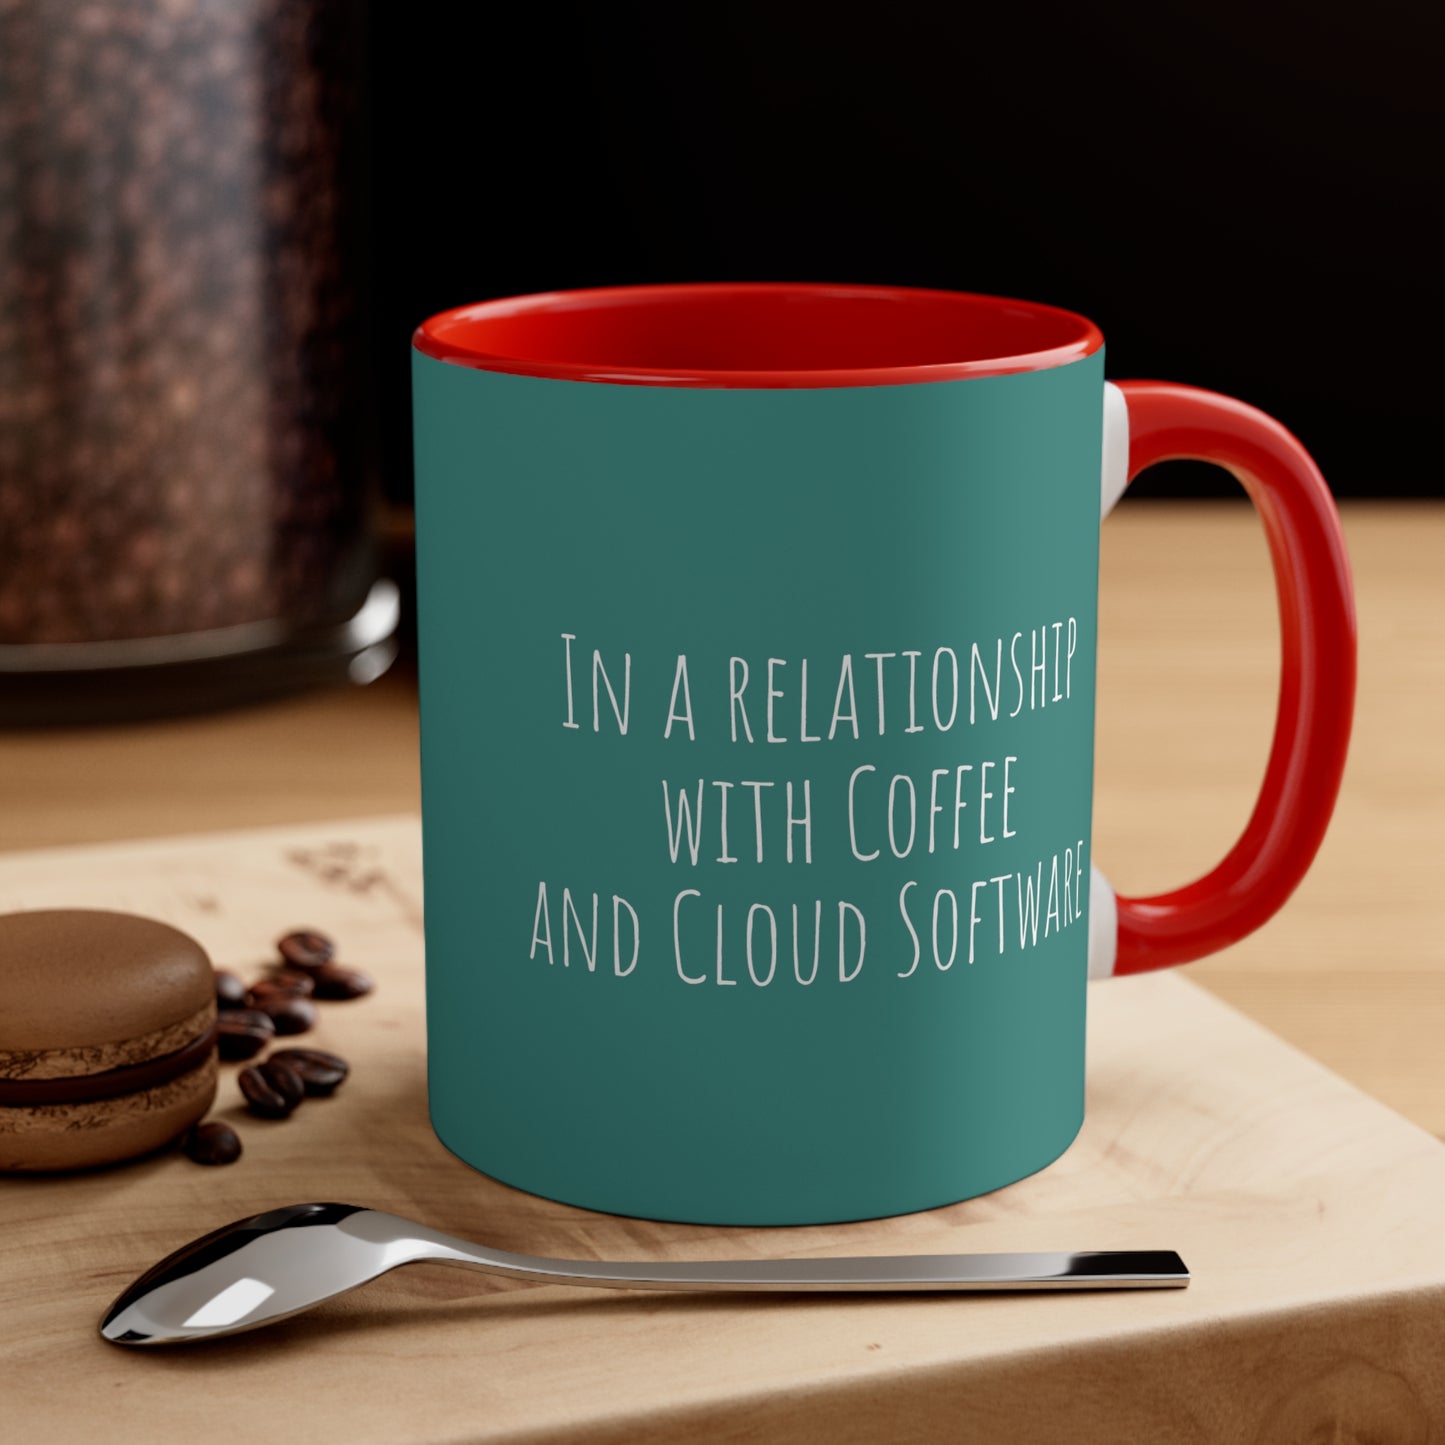 In a relationship with Coffee and Cloud Software